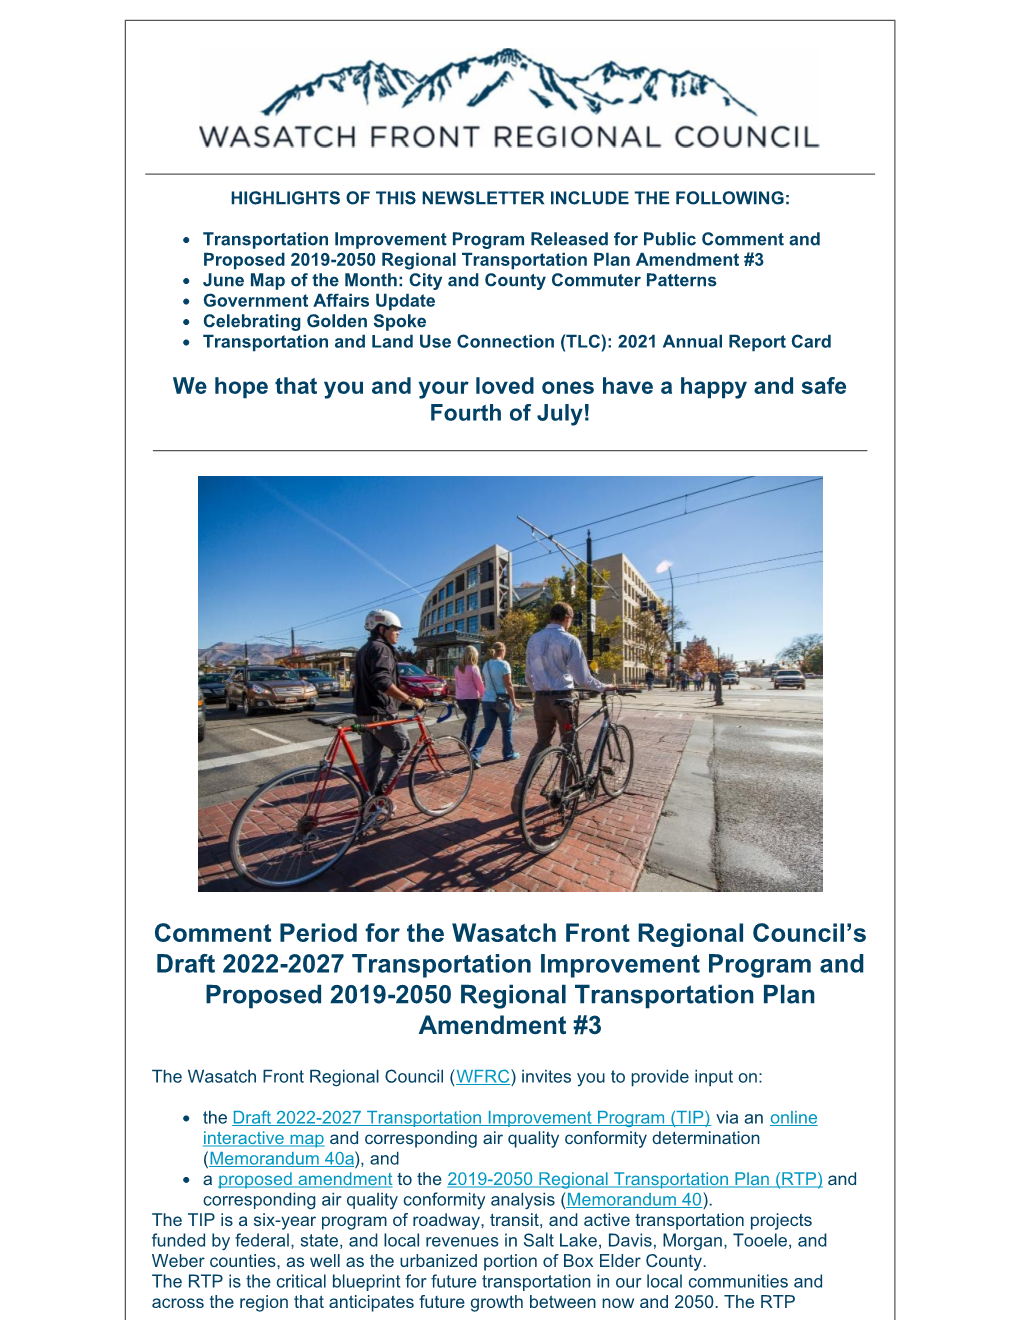 Comment Period for the Wasatch Front Regional Council's Draft 2022-2027 Transportation Improvement Program and Proposed 2019-2